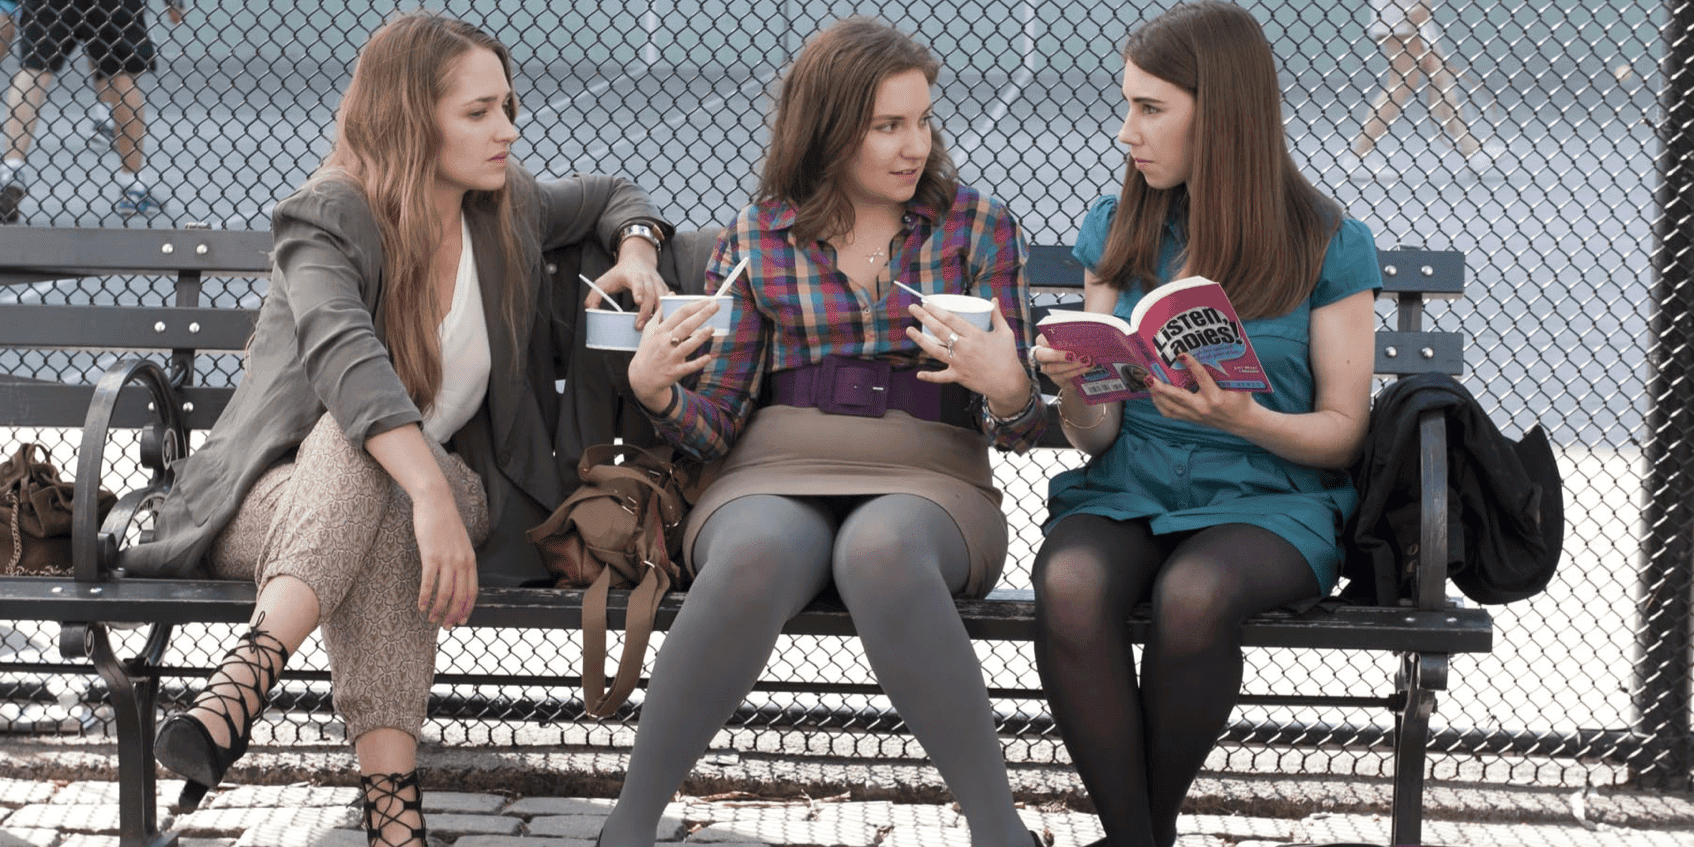 Jemina Kirke, Lena Dunham, and Zosia Mamet sitting on a park bench holding books and ice cream cups in this image from Apatow Productions